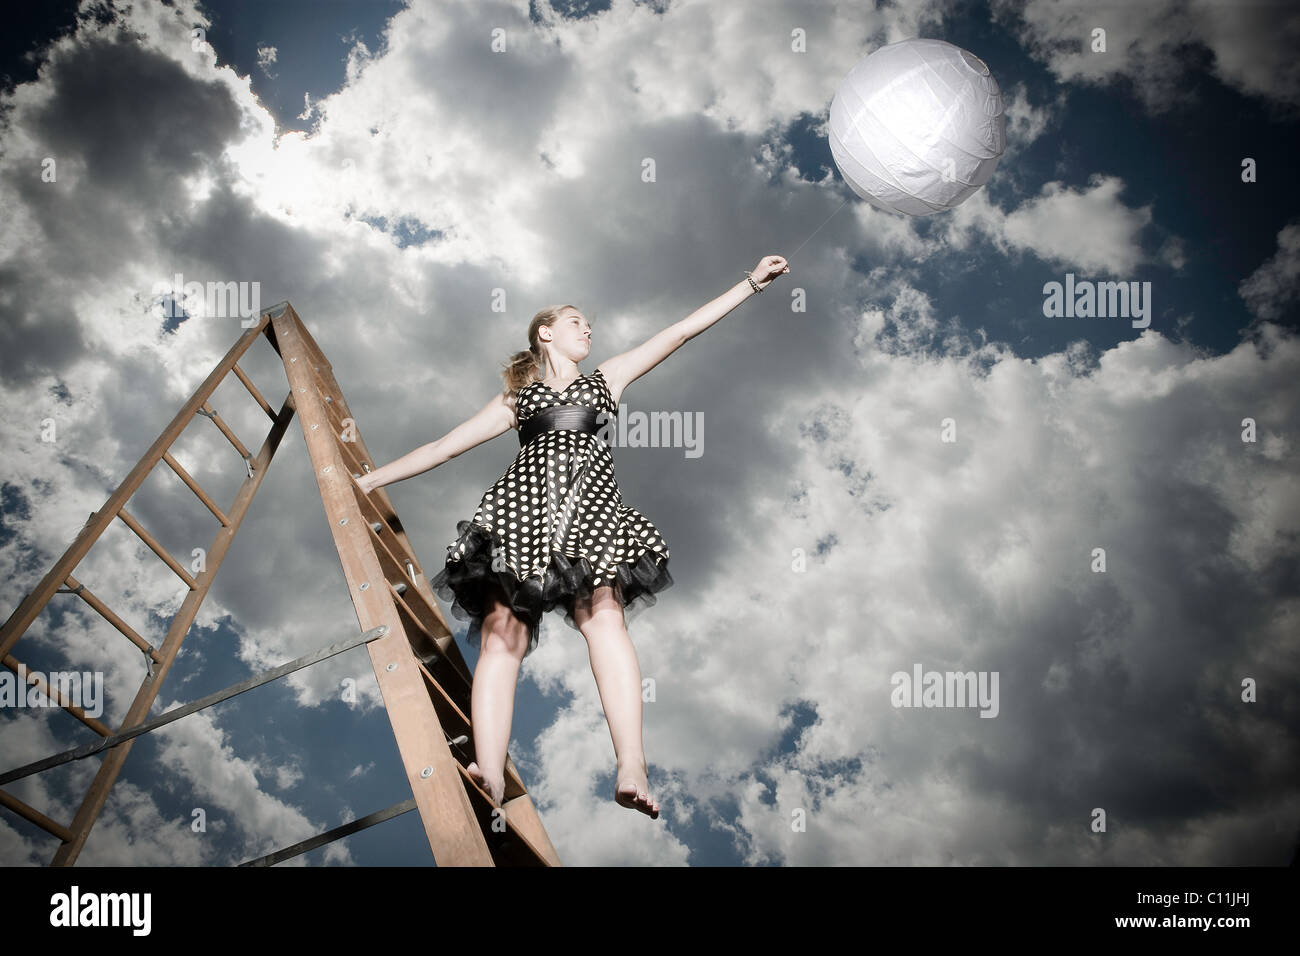 A teenage girl wearing a black and white polka dotted dress stands on a ladder while holding a white ball. Stock Photo